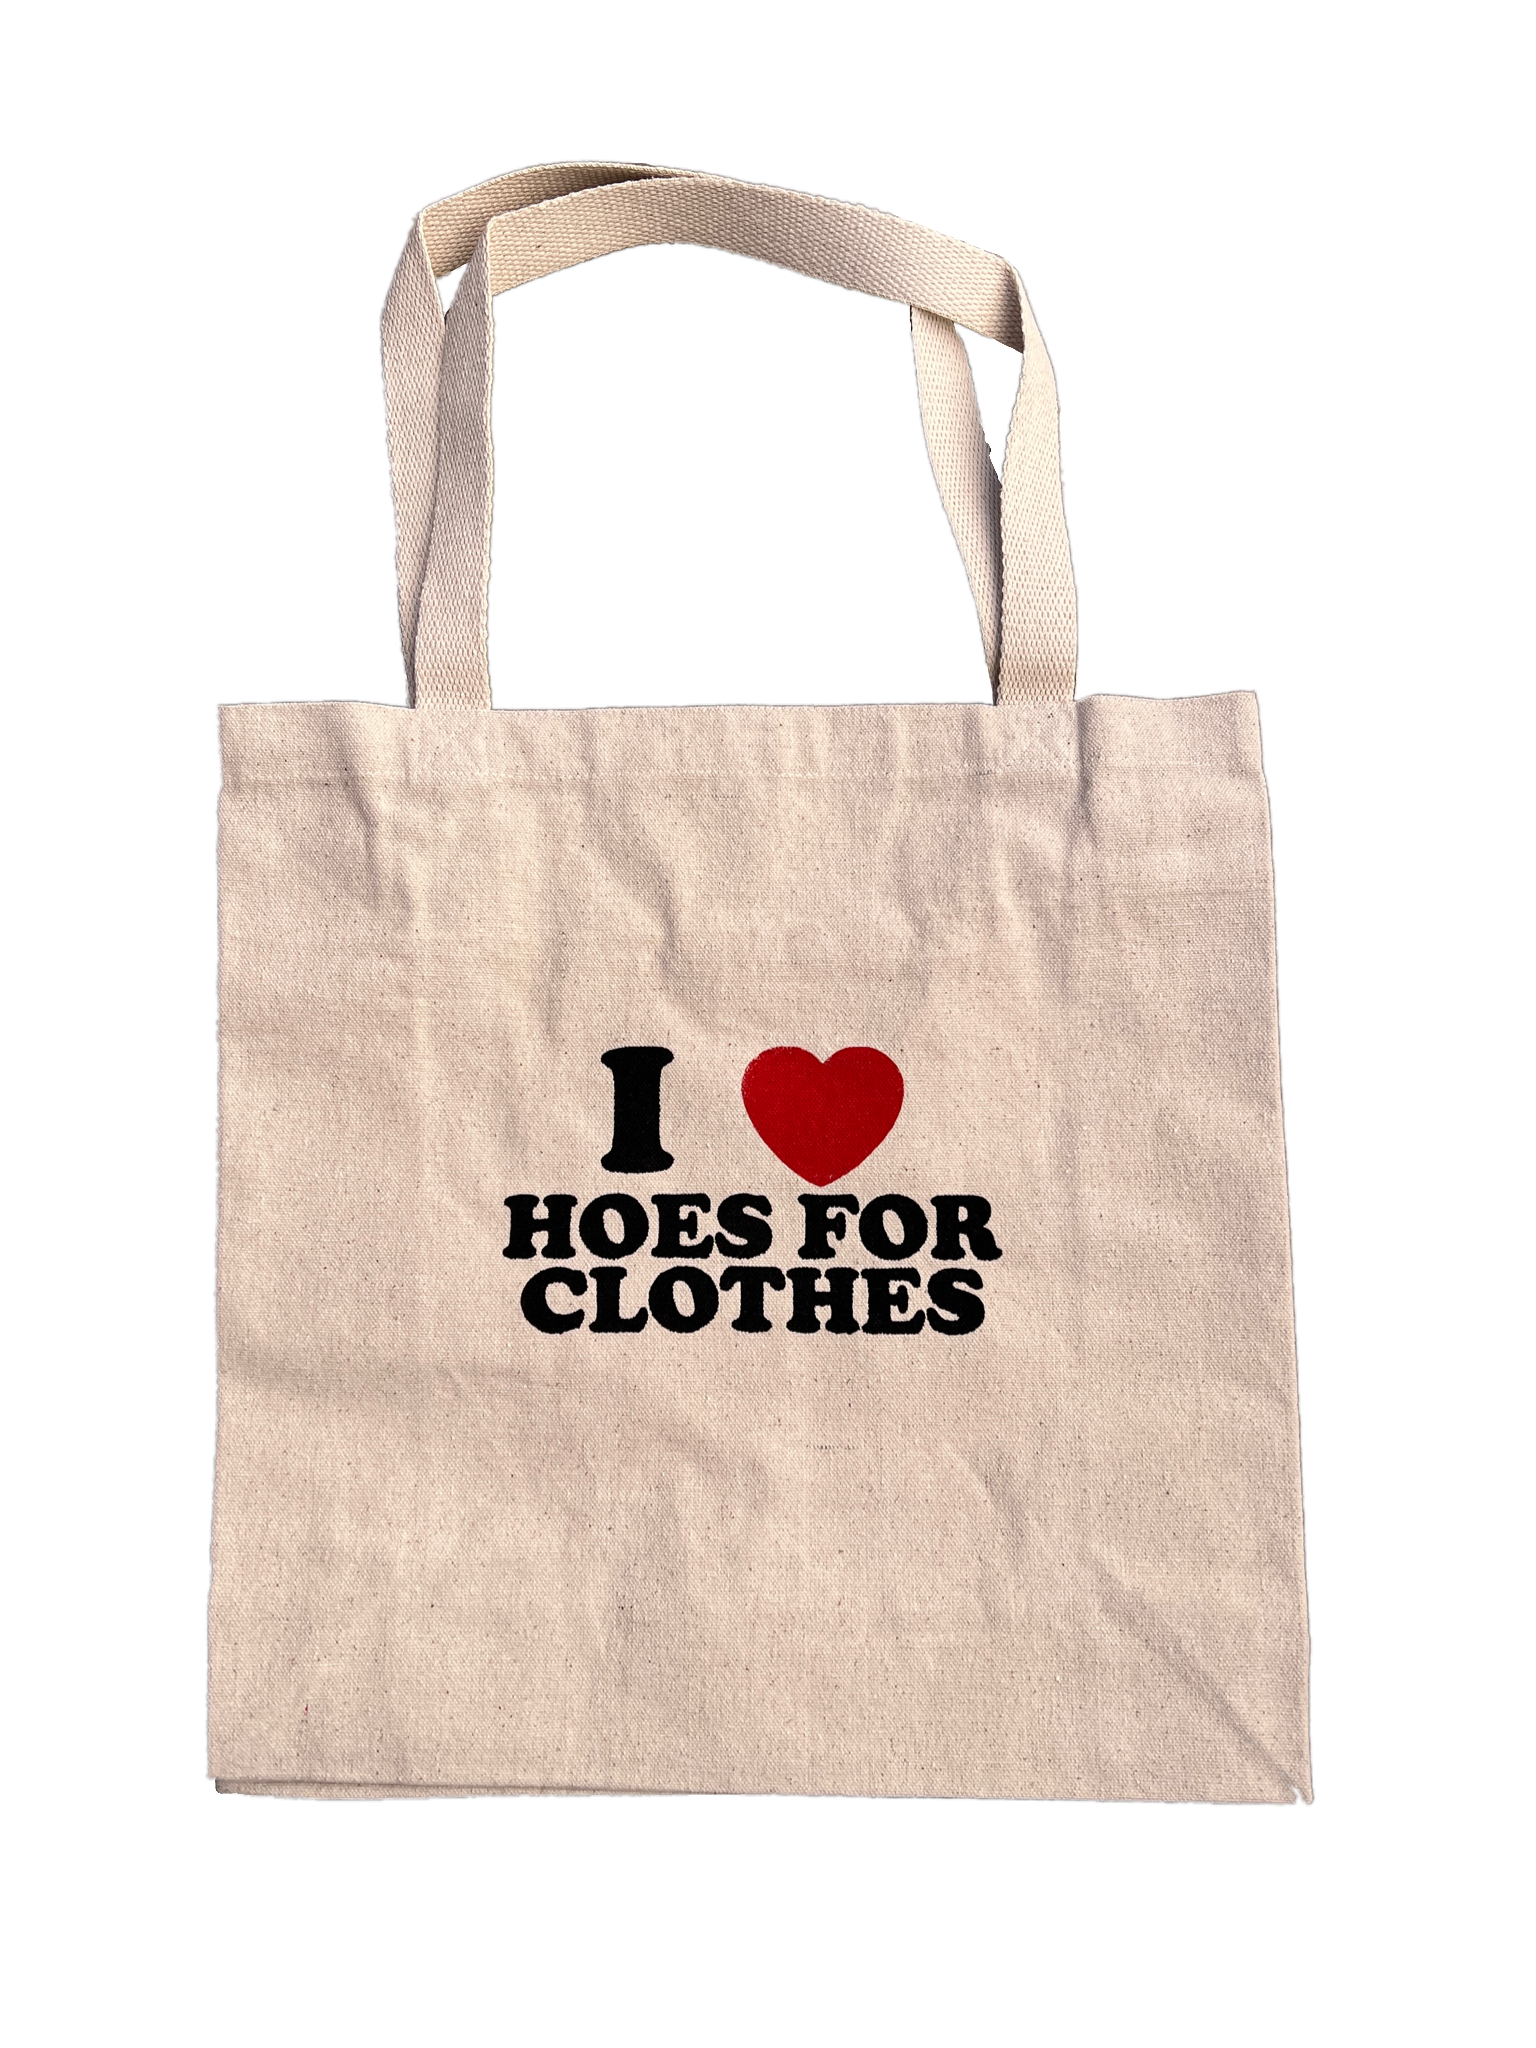 I HEART HOESFORCLOTHES Tote – Hoes For Clothes